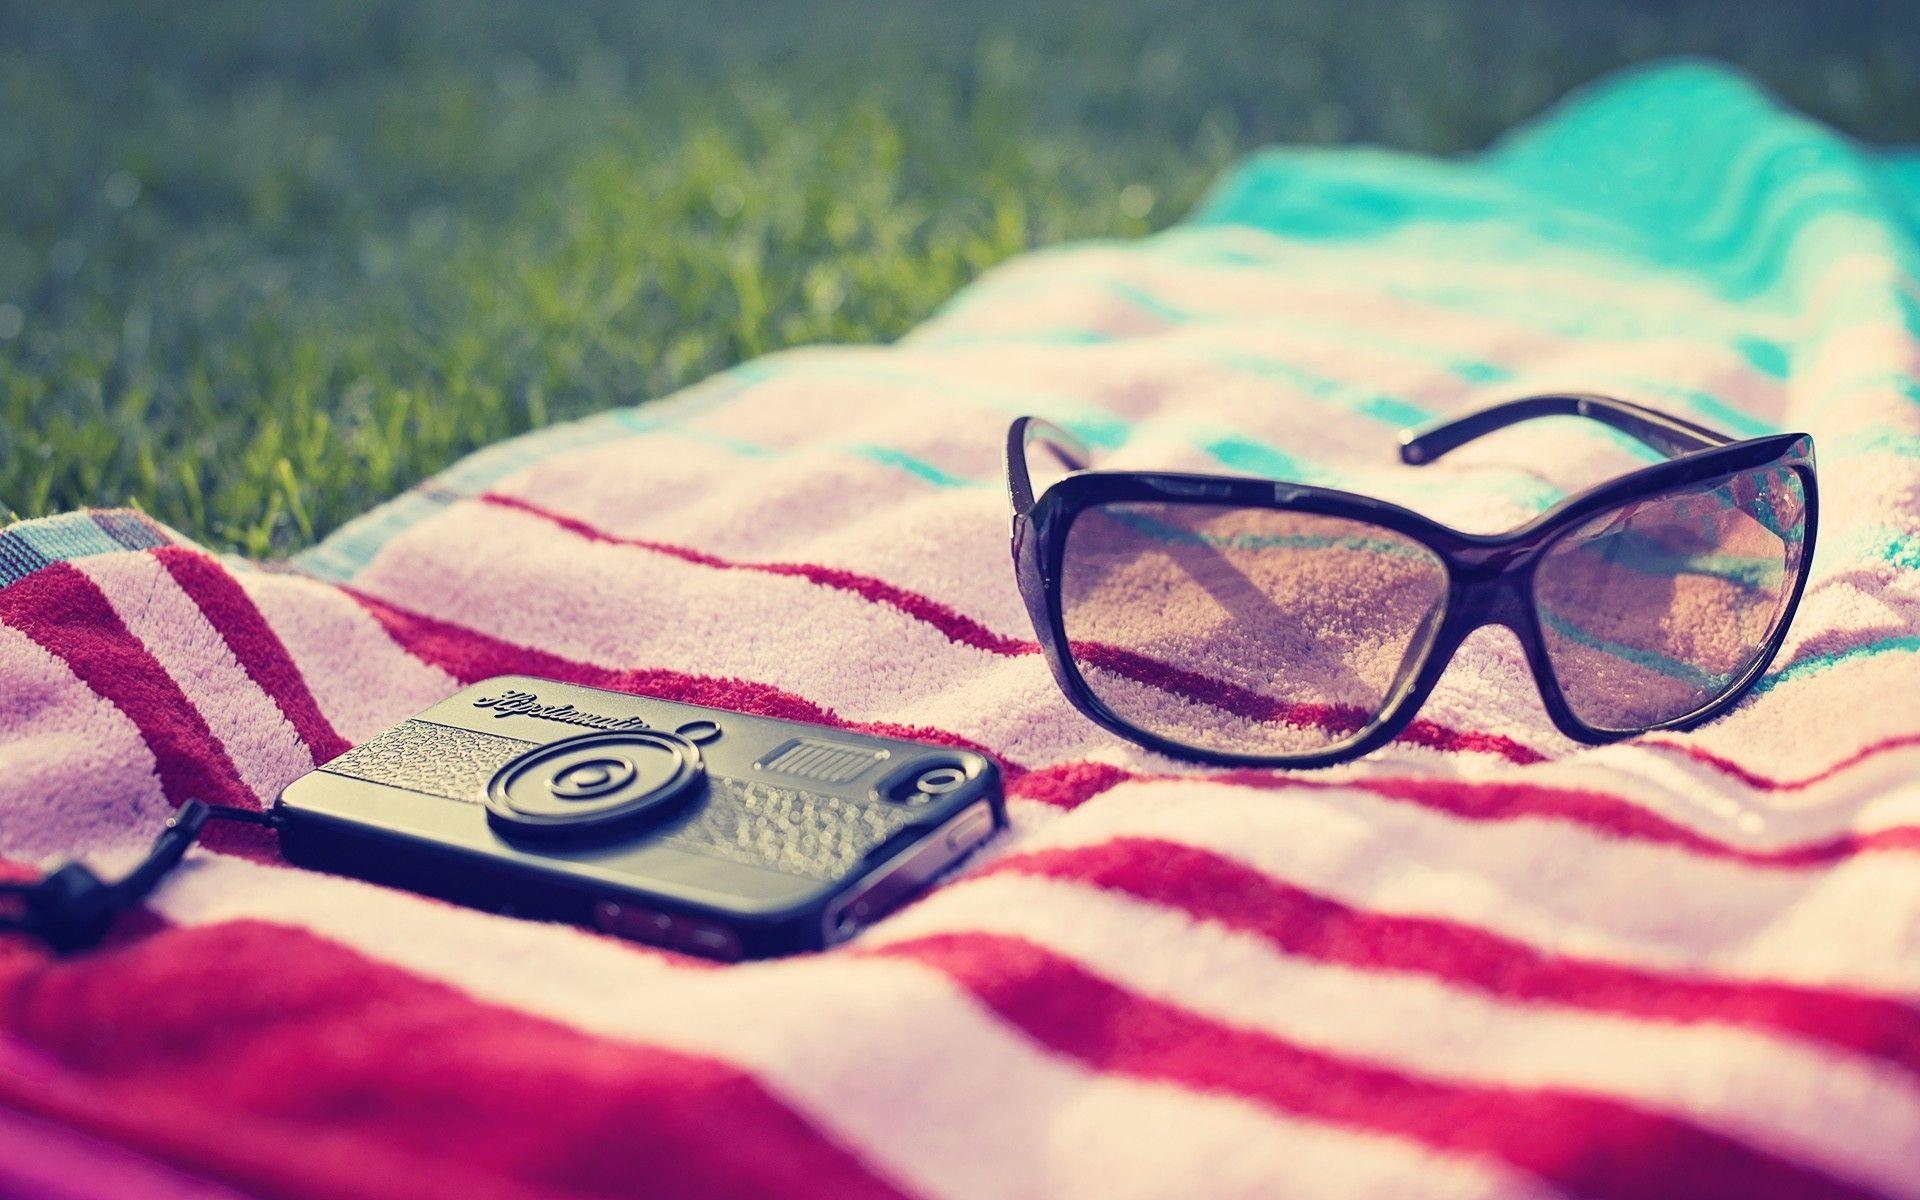 Glasses, Green grass, phone, blanket wallpaper and image